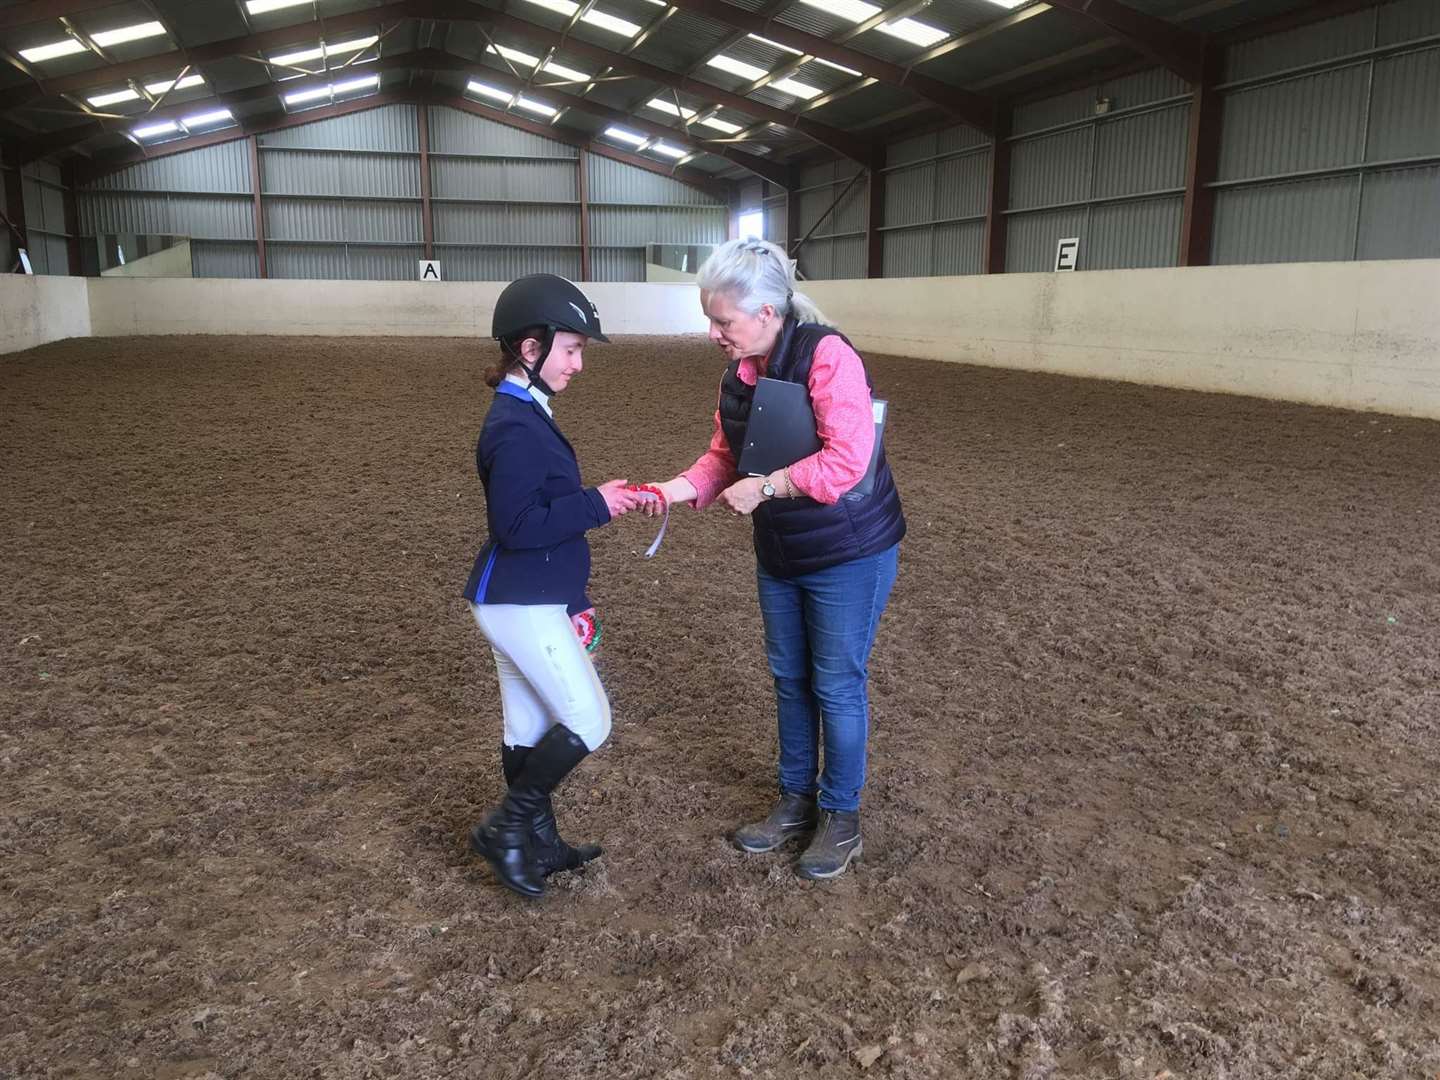 Barabra Manson, Grampian and Highland Regional Chair, presents Kyla with a prize.